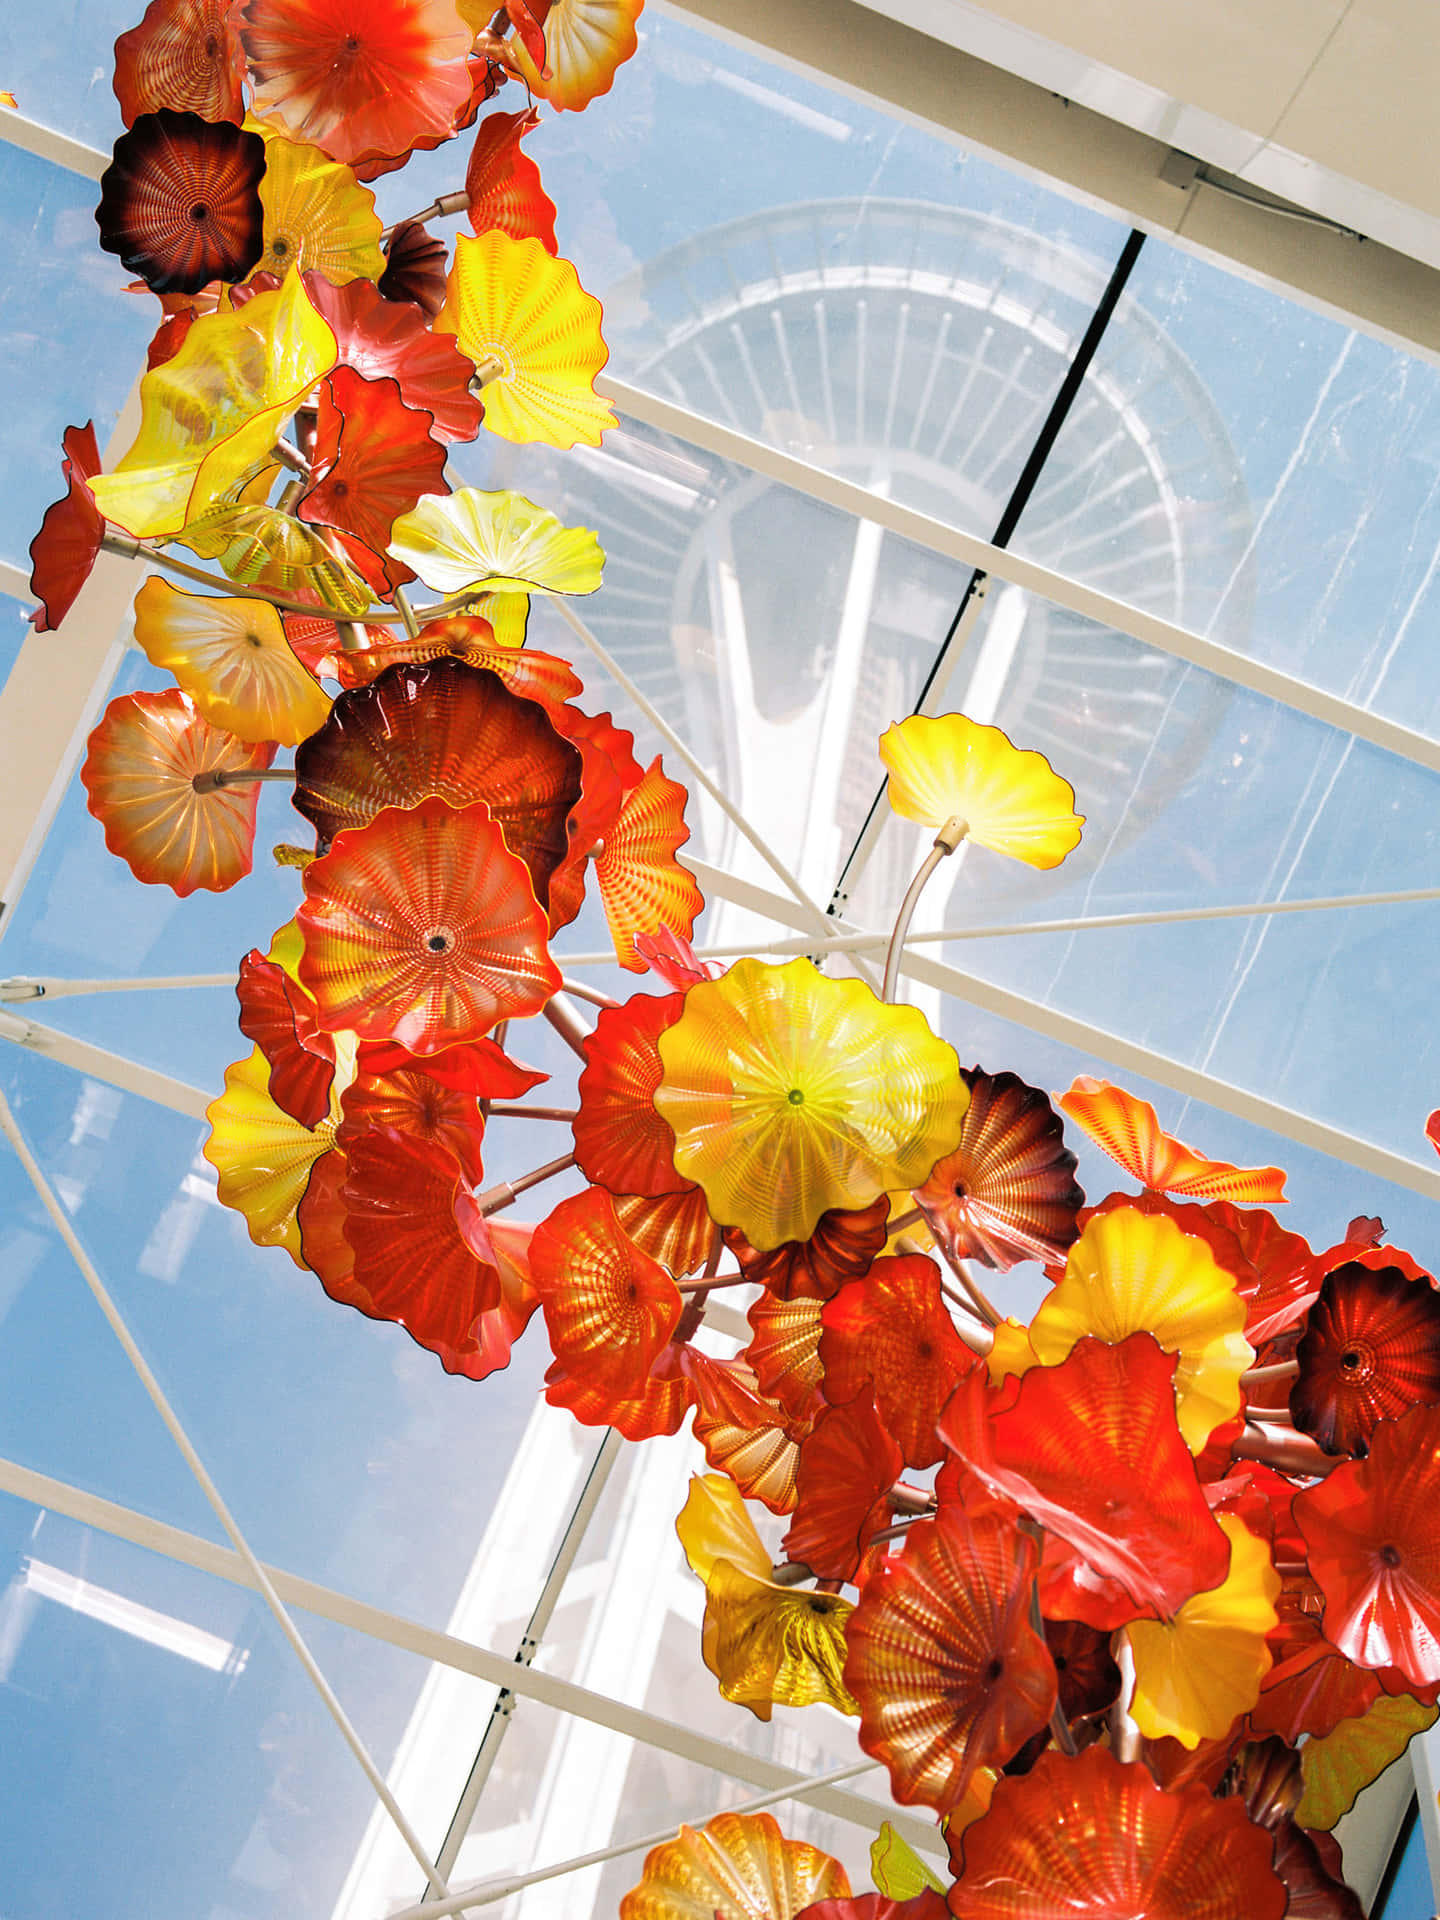 Chihuly Glass Flowers Ceiling Exhibit Wallpaper